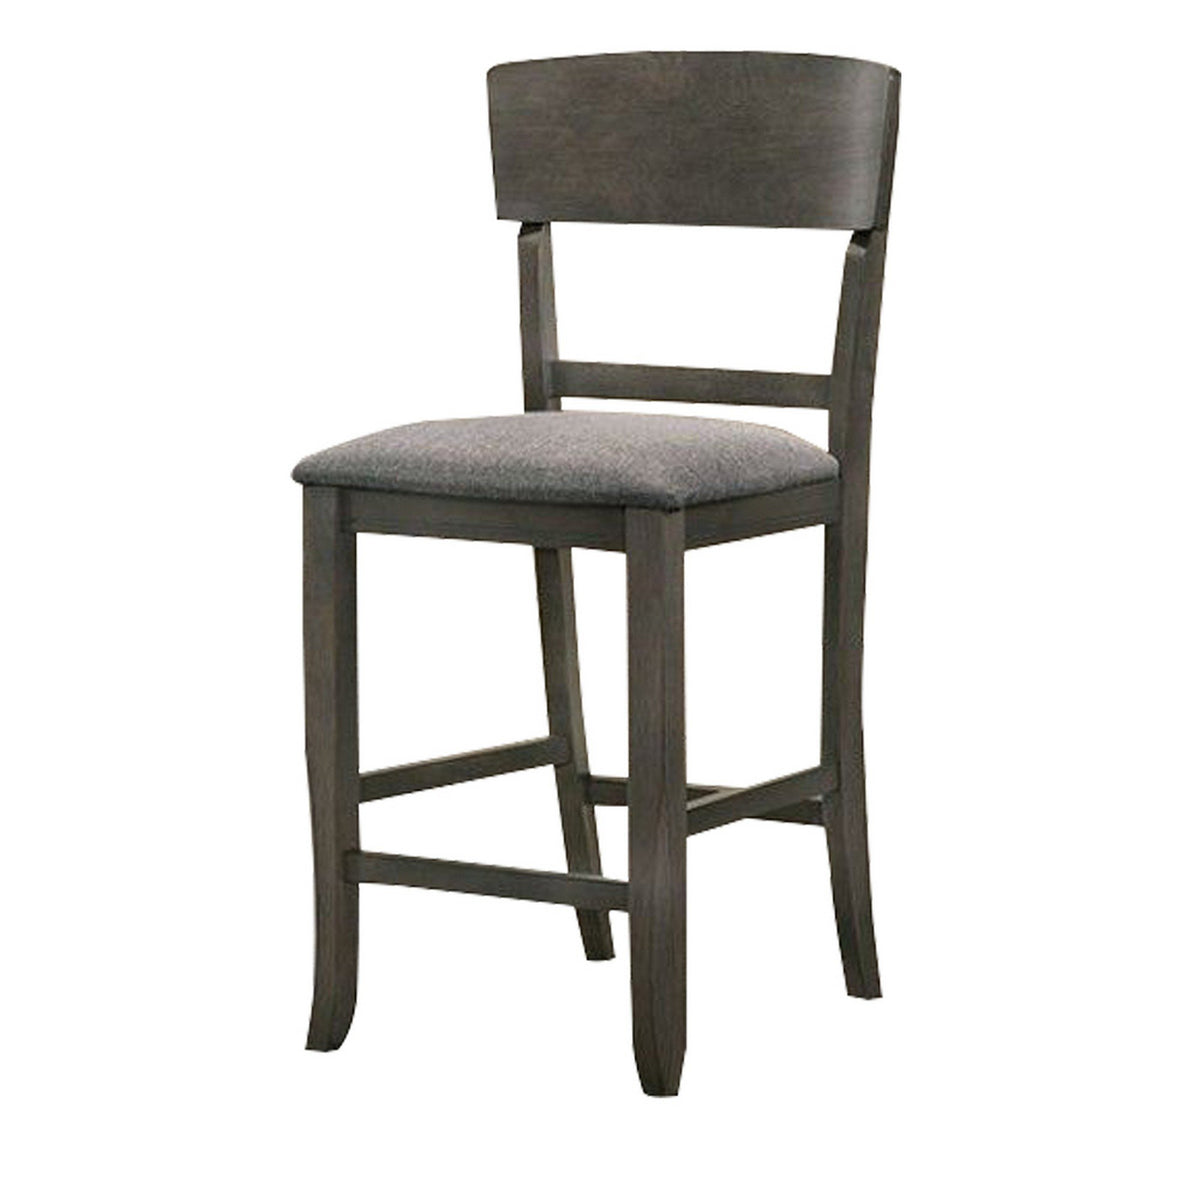 Wooden Counter Height Chair with Curved Back, Set of 2, Charcoal Gray - BM230035